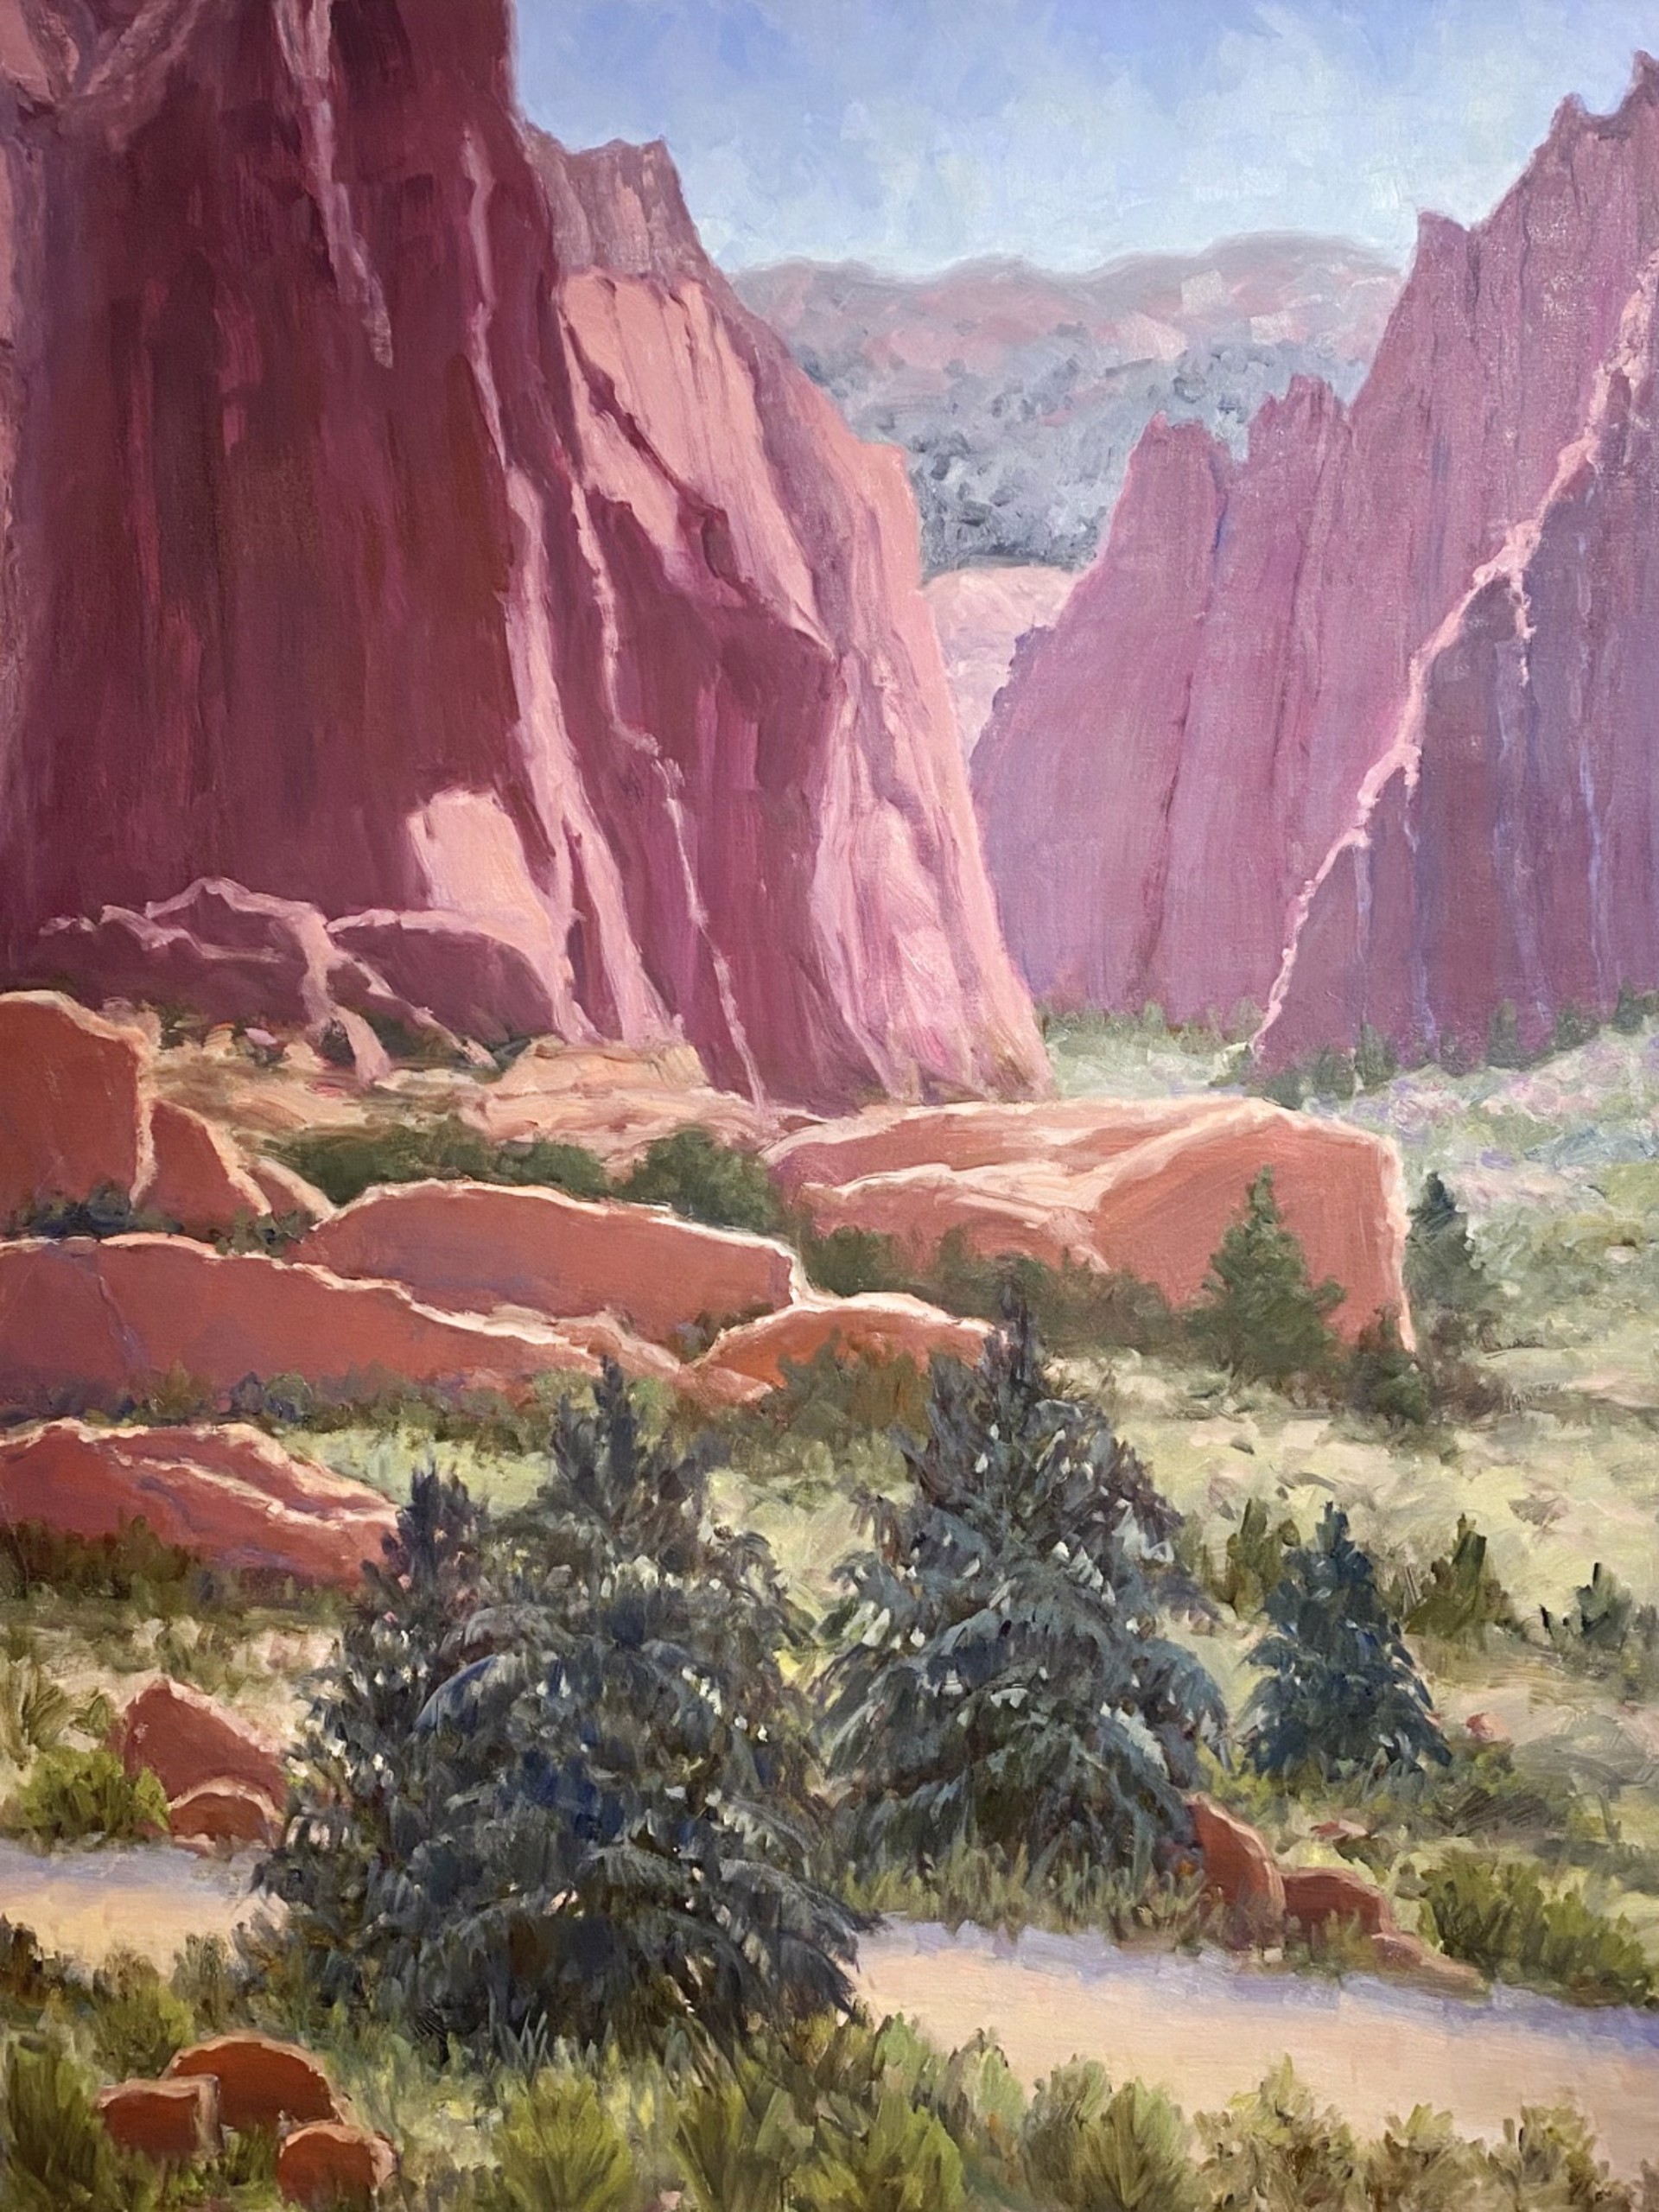 Kolob's Amazing Colors by Beth Ray